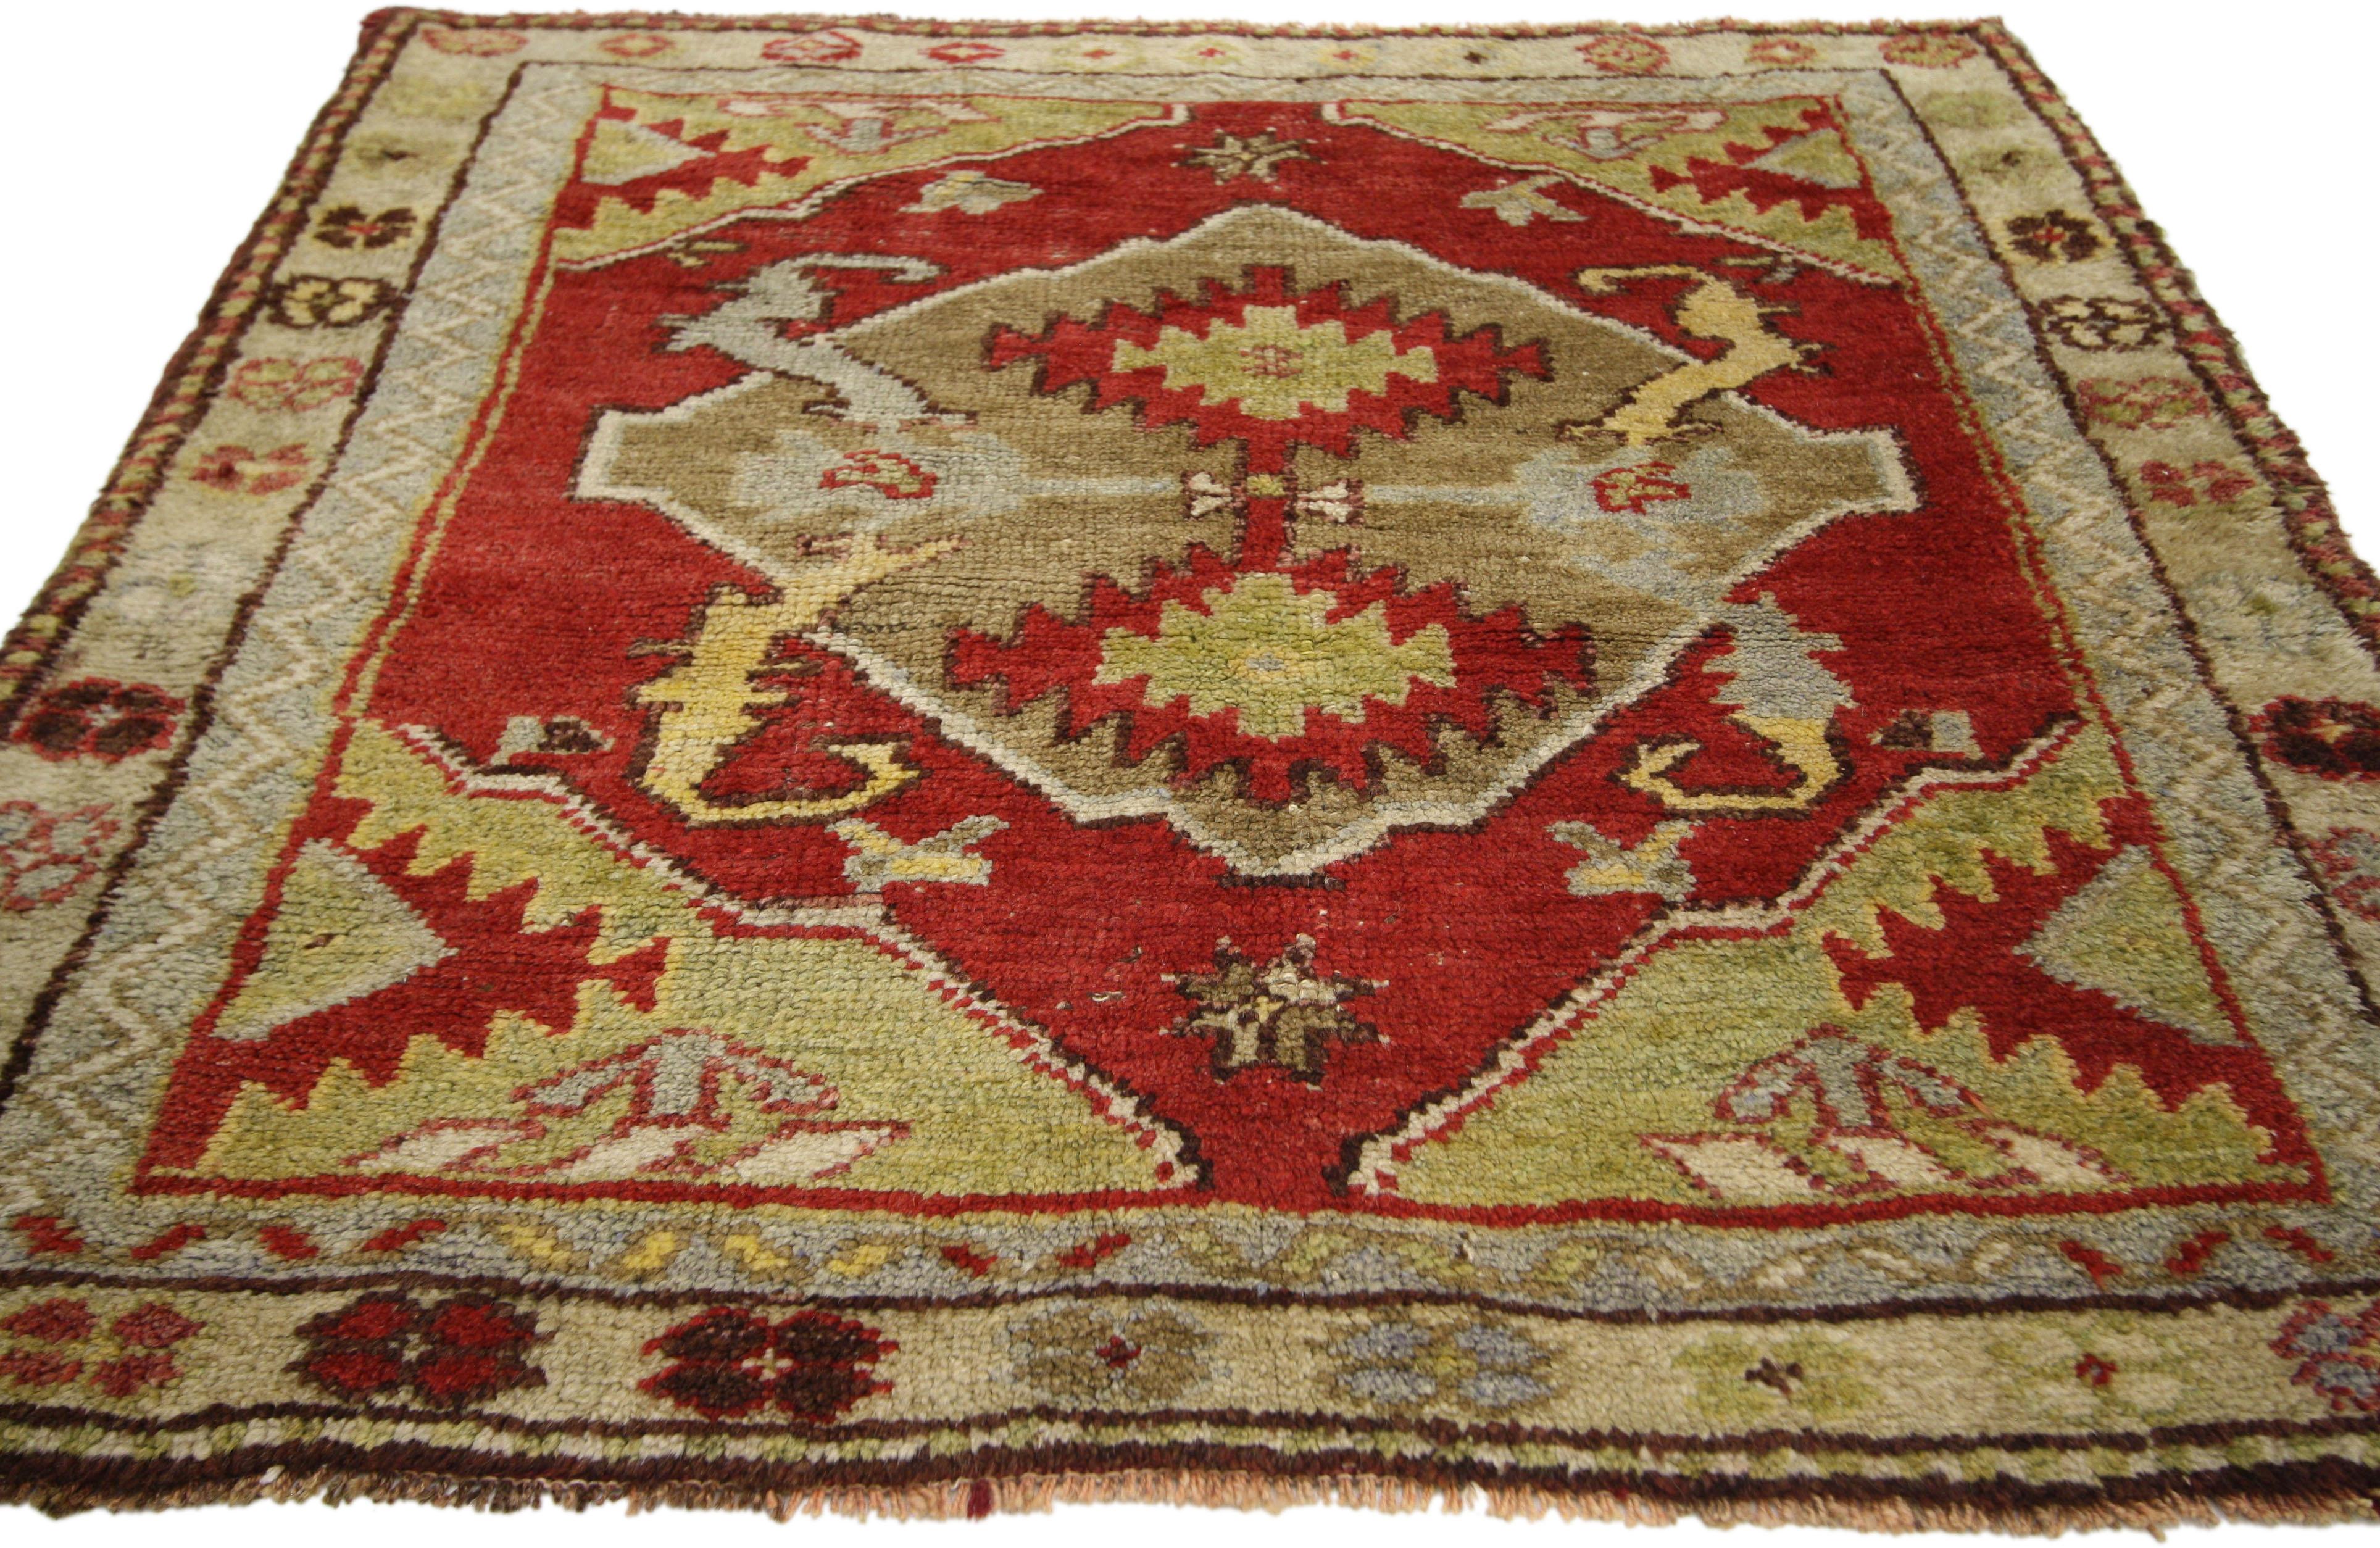 Vintage Turkish Oushak Rug with Baroque Style, Small Square Accent Rug In Good Condition For Sale In Dallas, TX